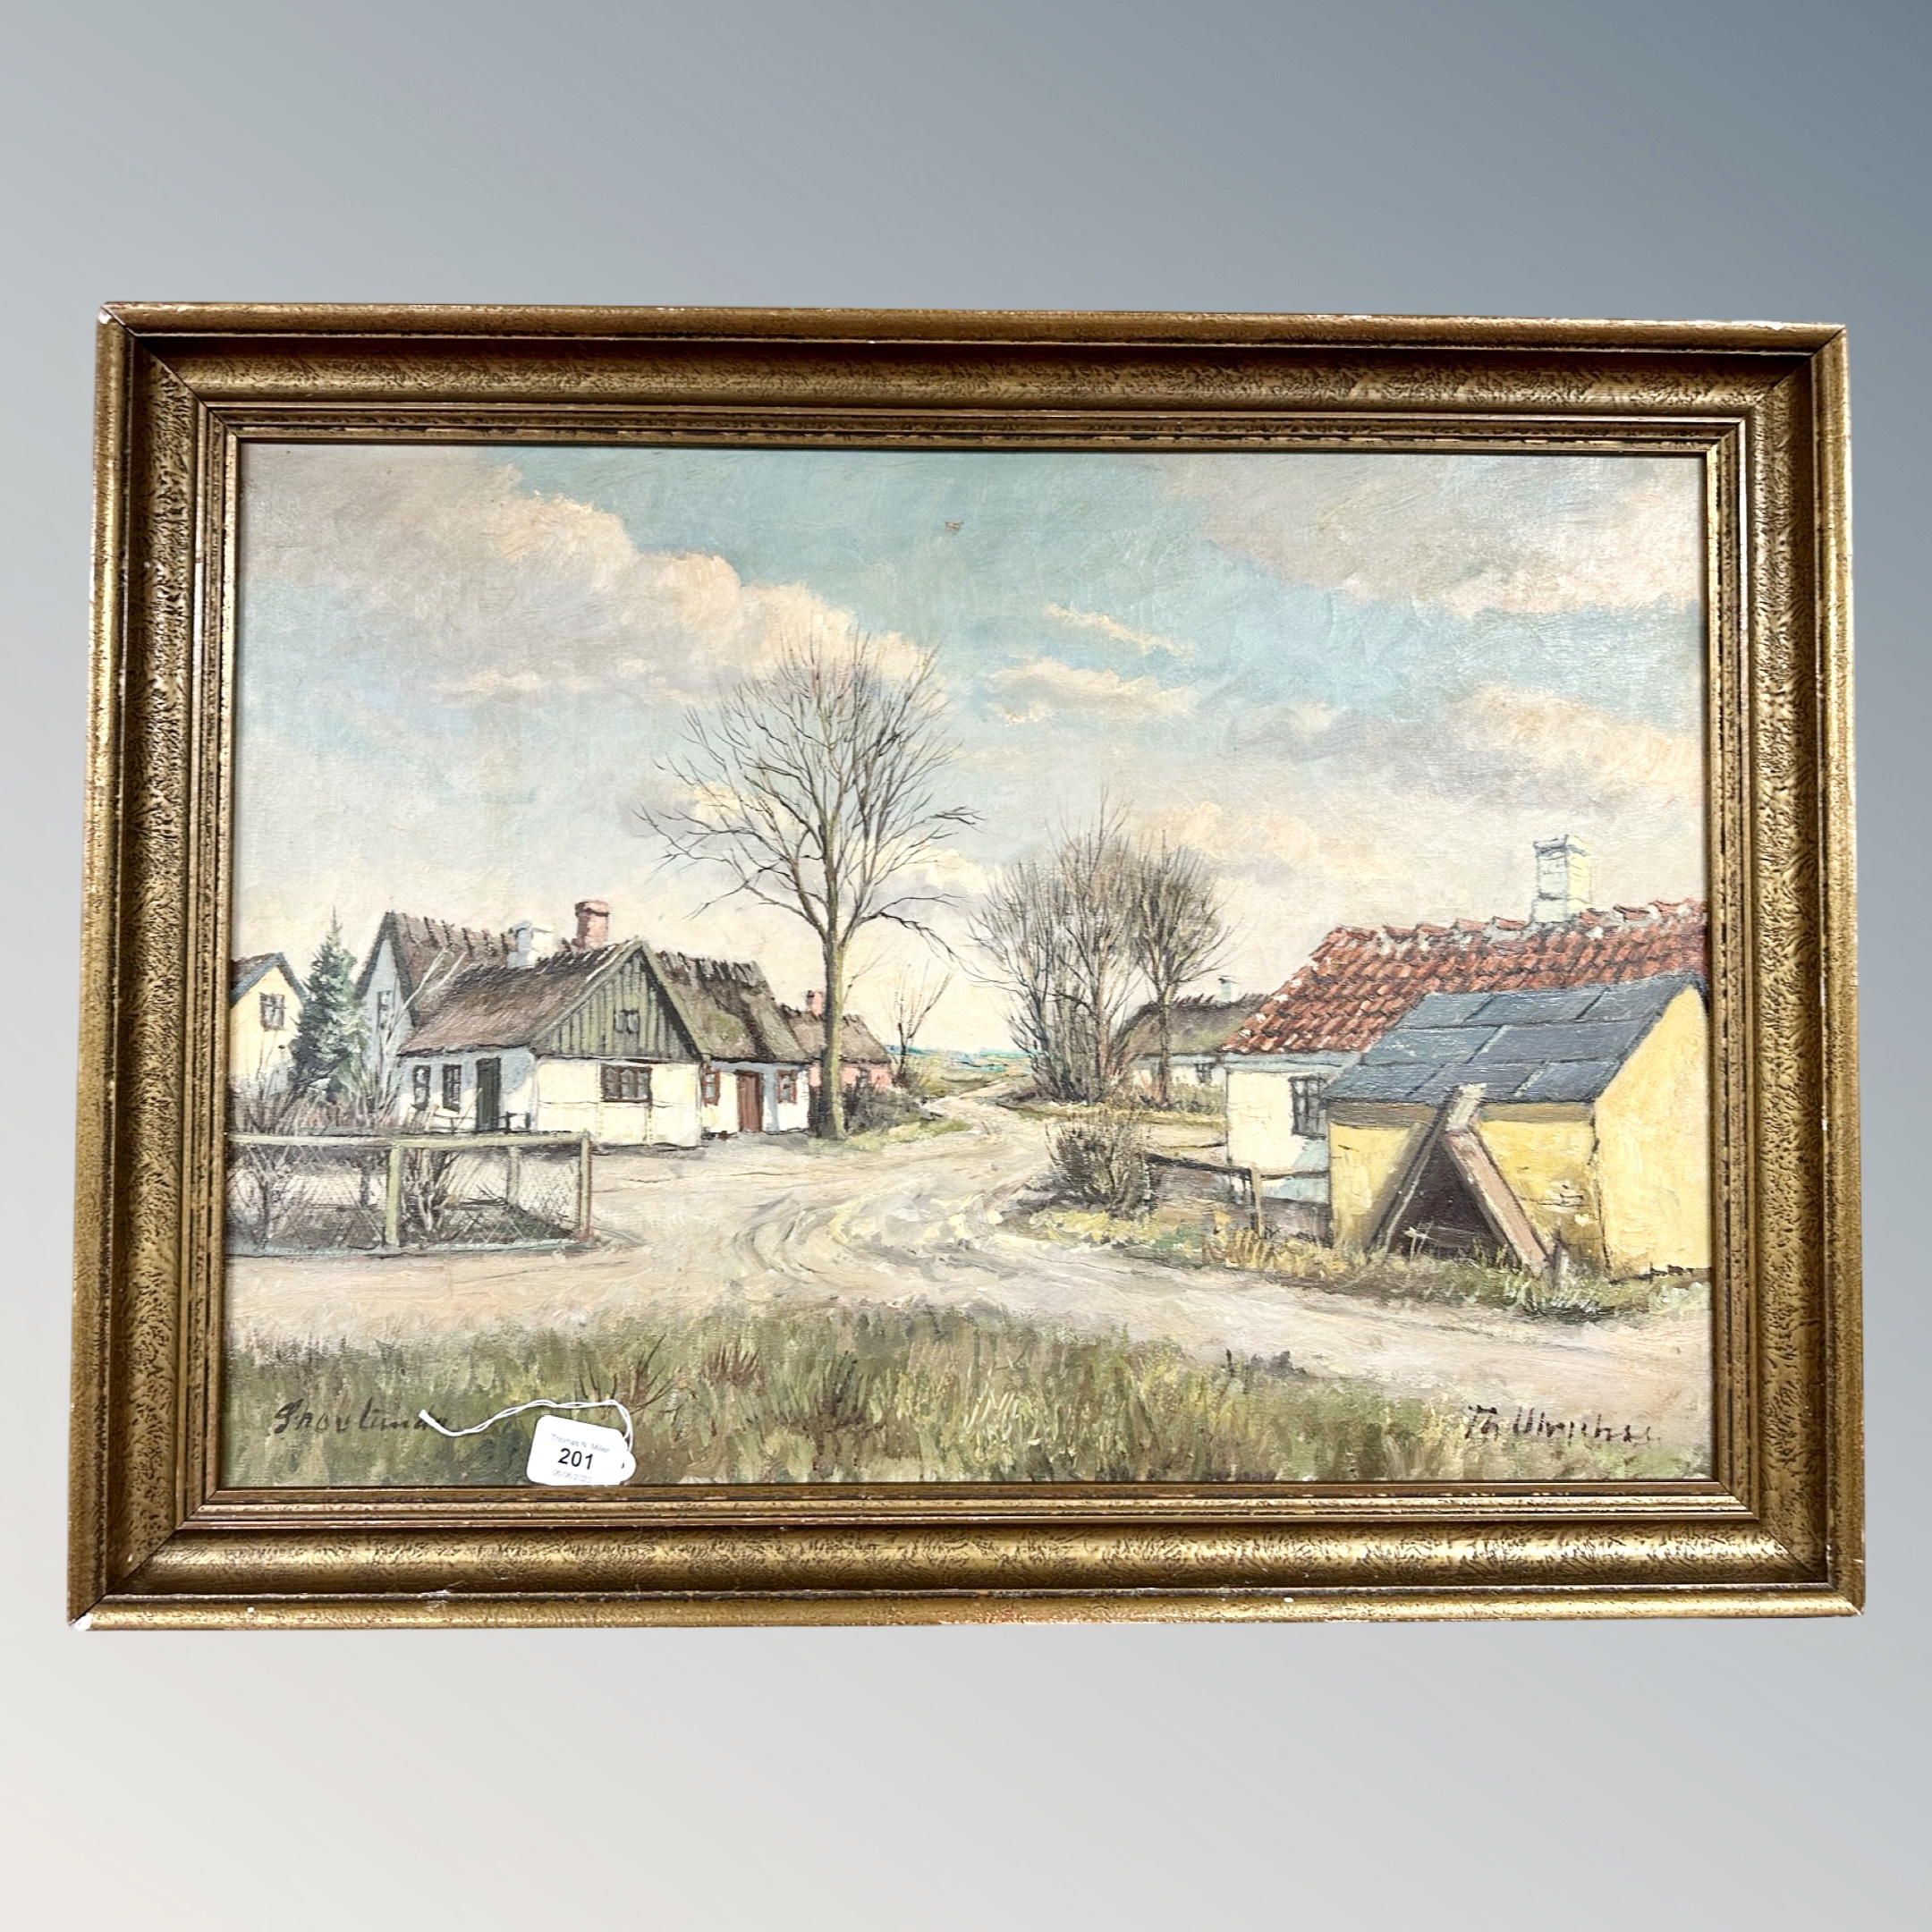 Danish School : Buildings by a coast, oil on canvas, 67cm by 47cm, indistinctly signed.